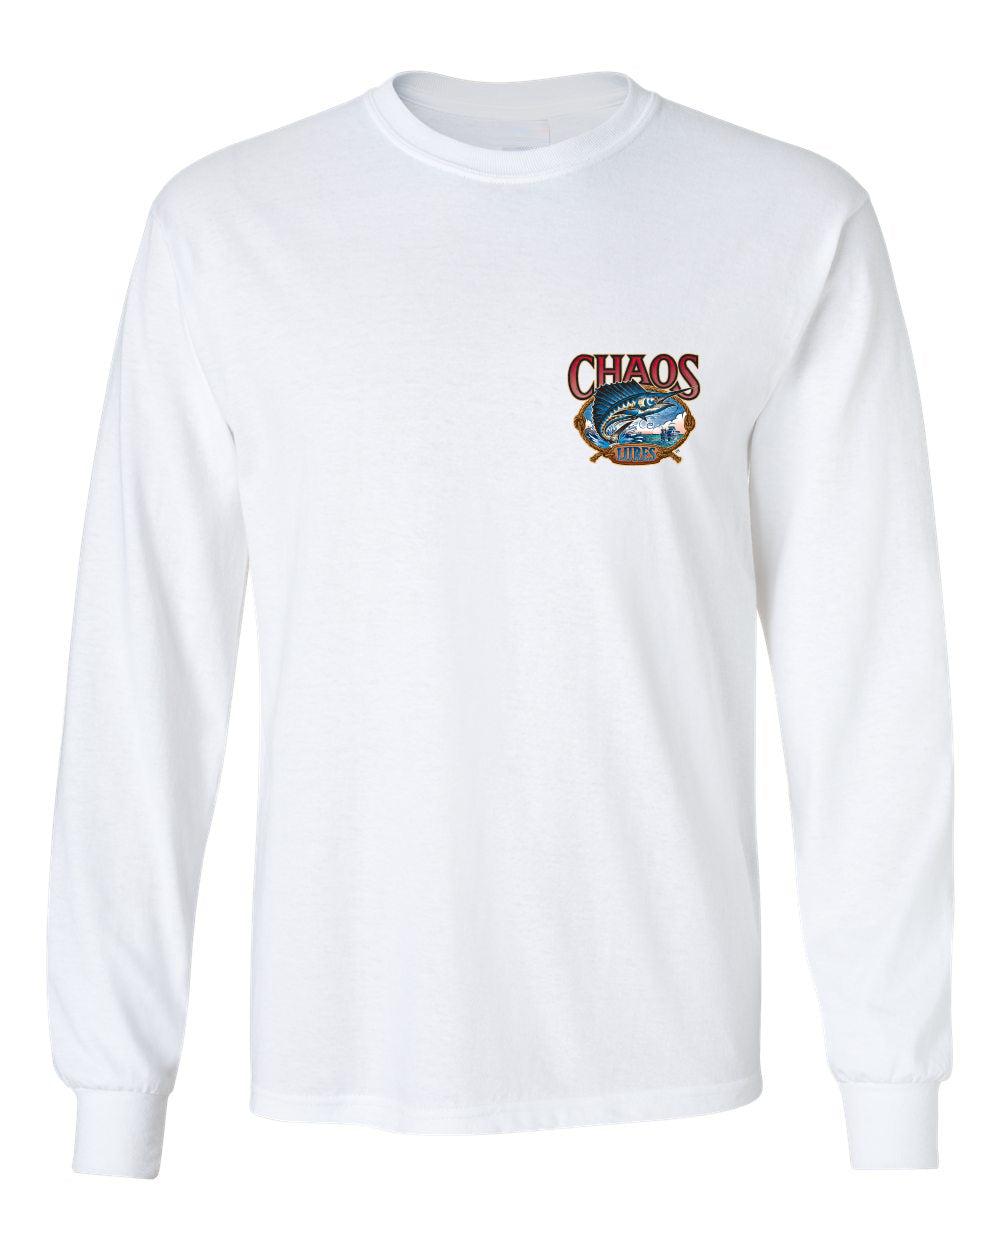 Long Sleeve CHAOS Lures T-Shirt